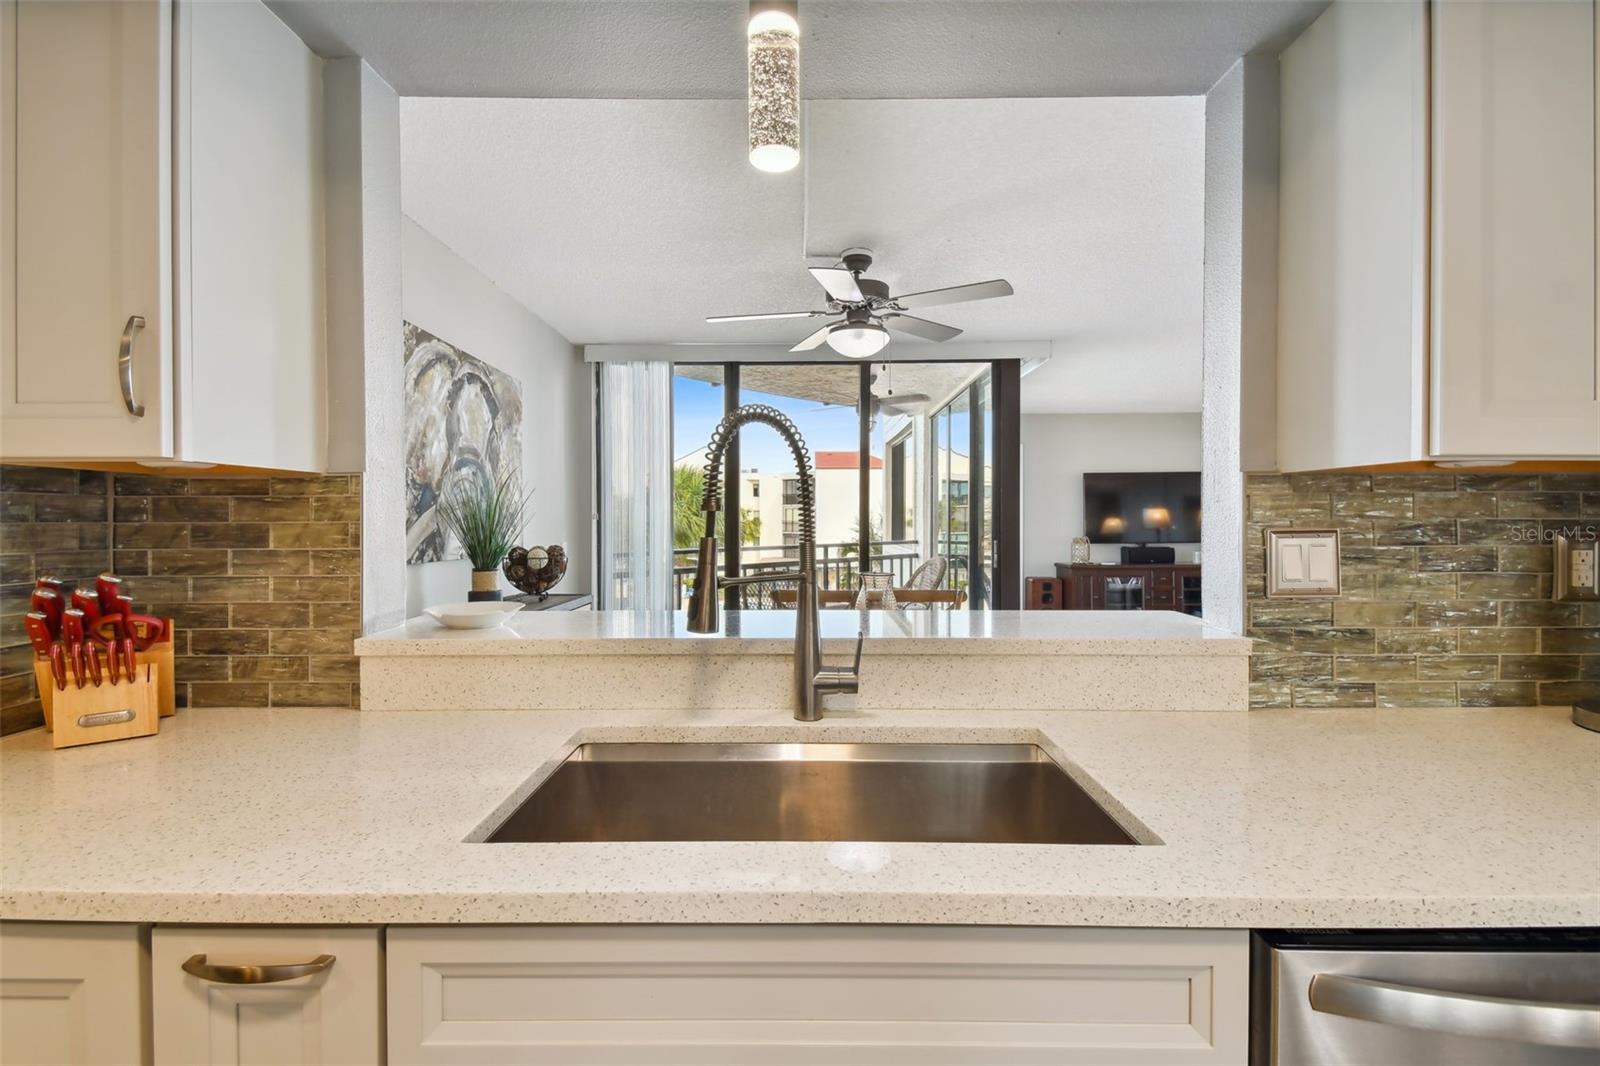 Oversized stainless steel sink is a welcome Kitchen's pass-through counter opens to dining space with balcony views